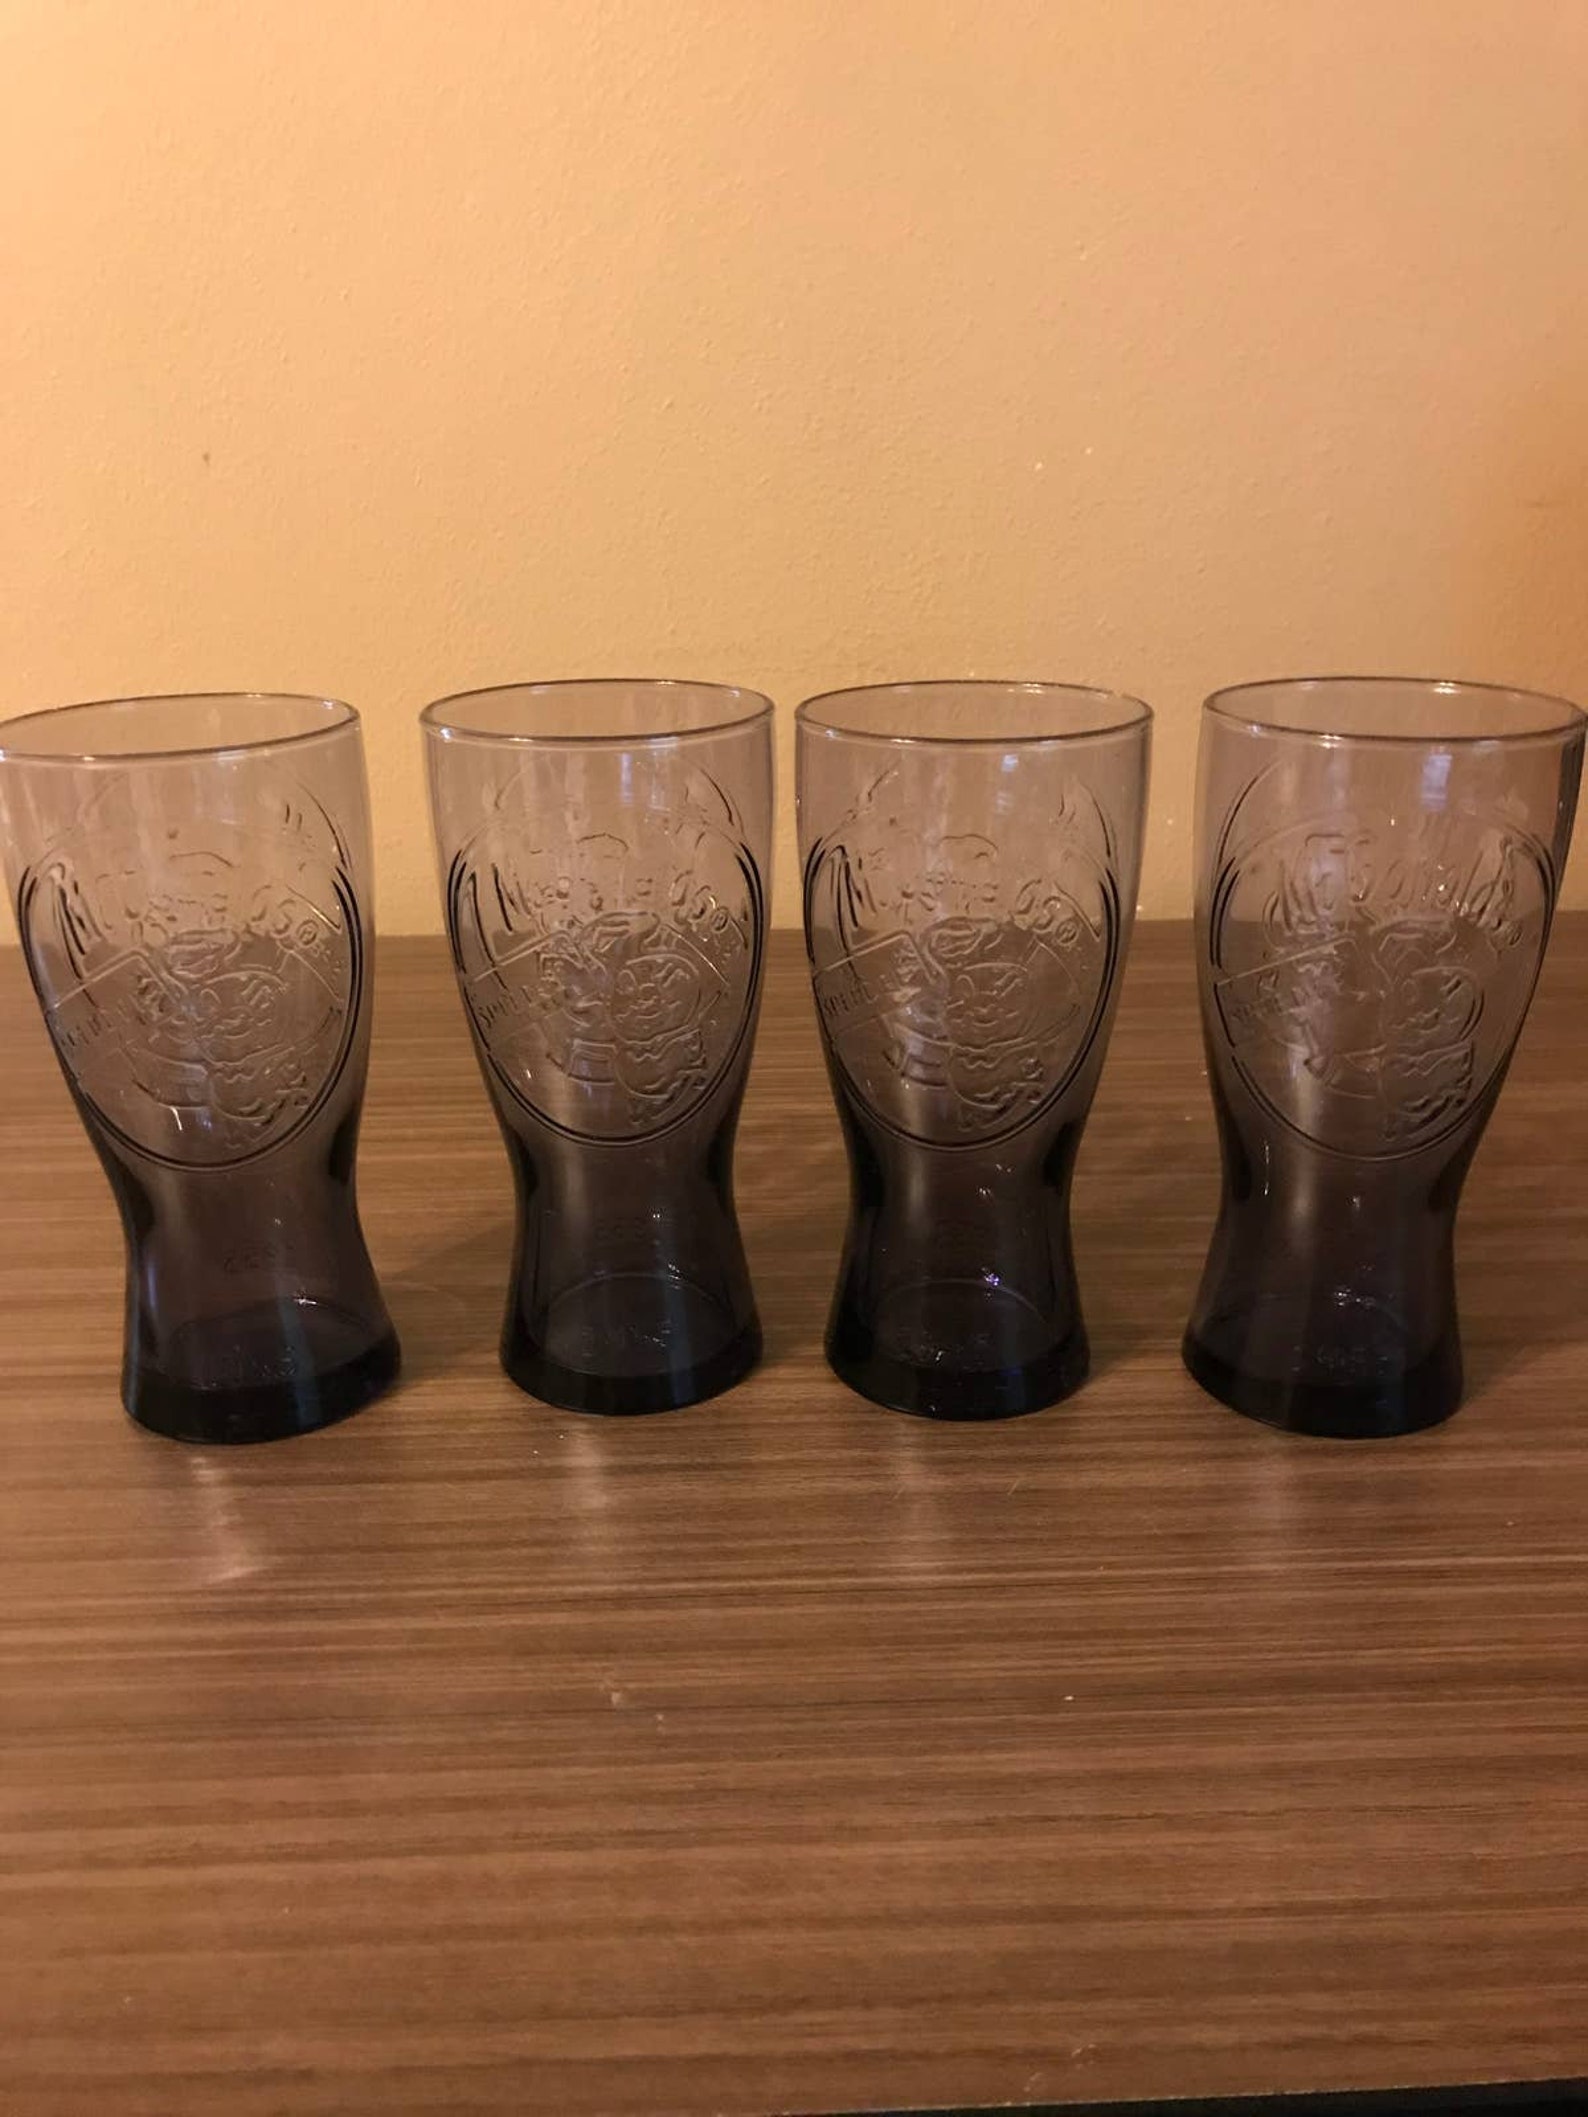 Vintage McDonald's Collectable Star Wars Glasses